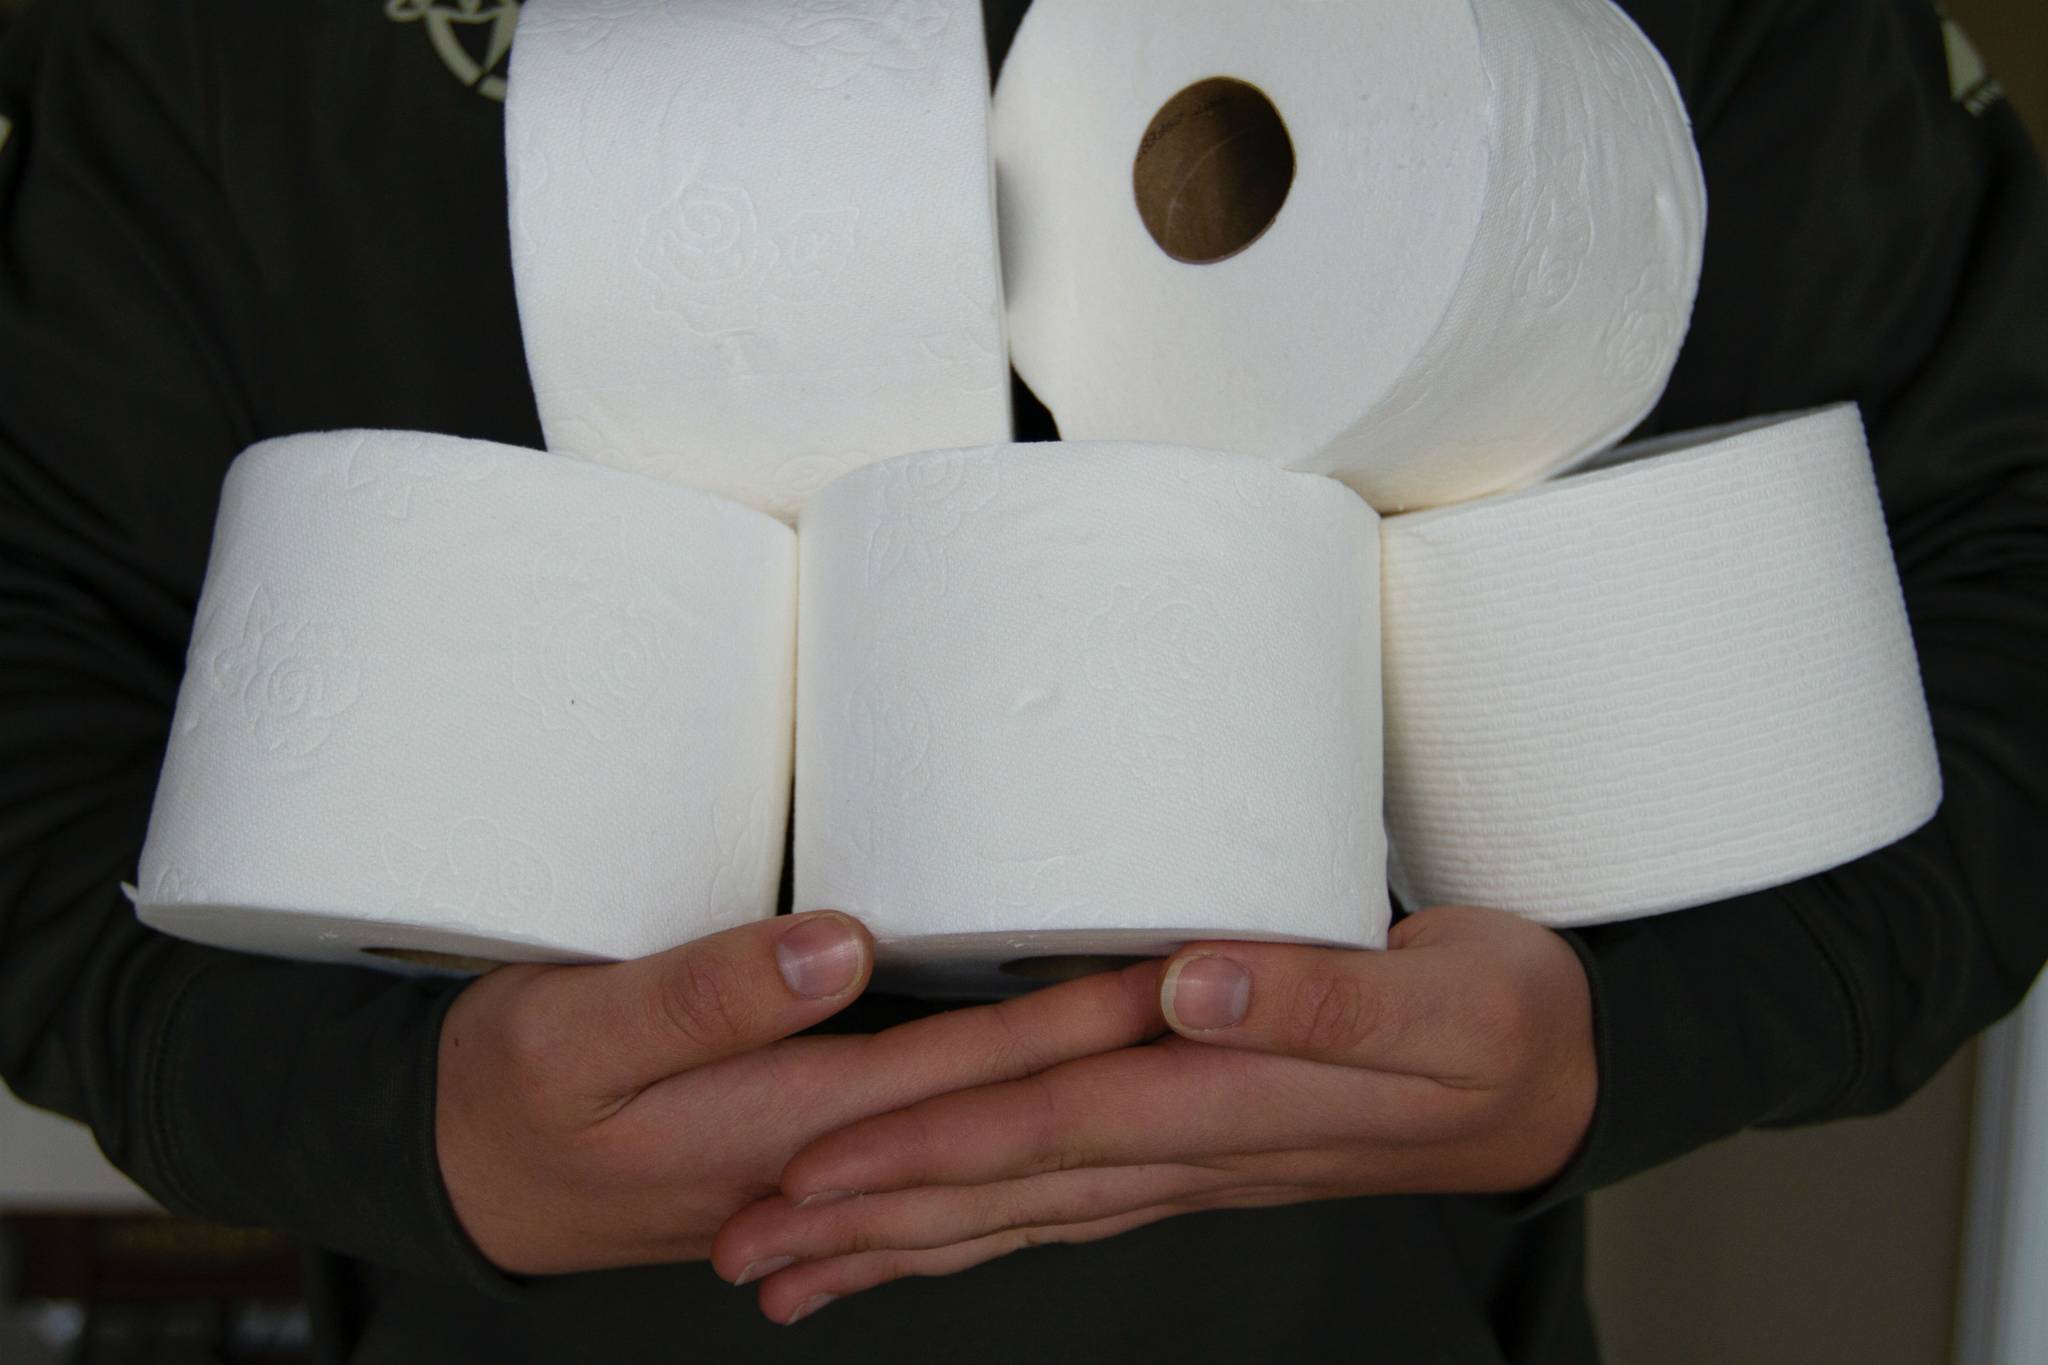 Who Gives a Crap turns toilet paper sales into donations